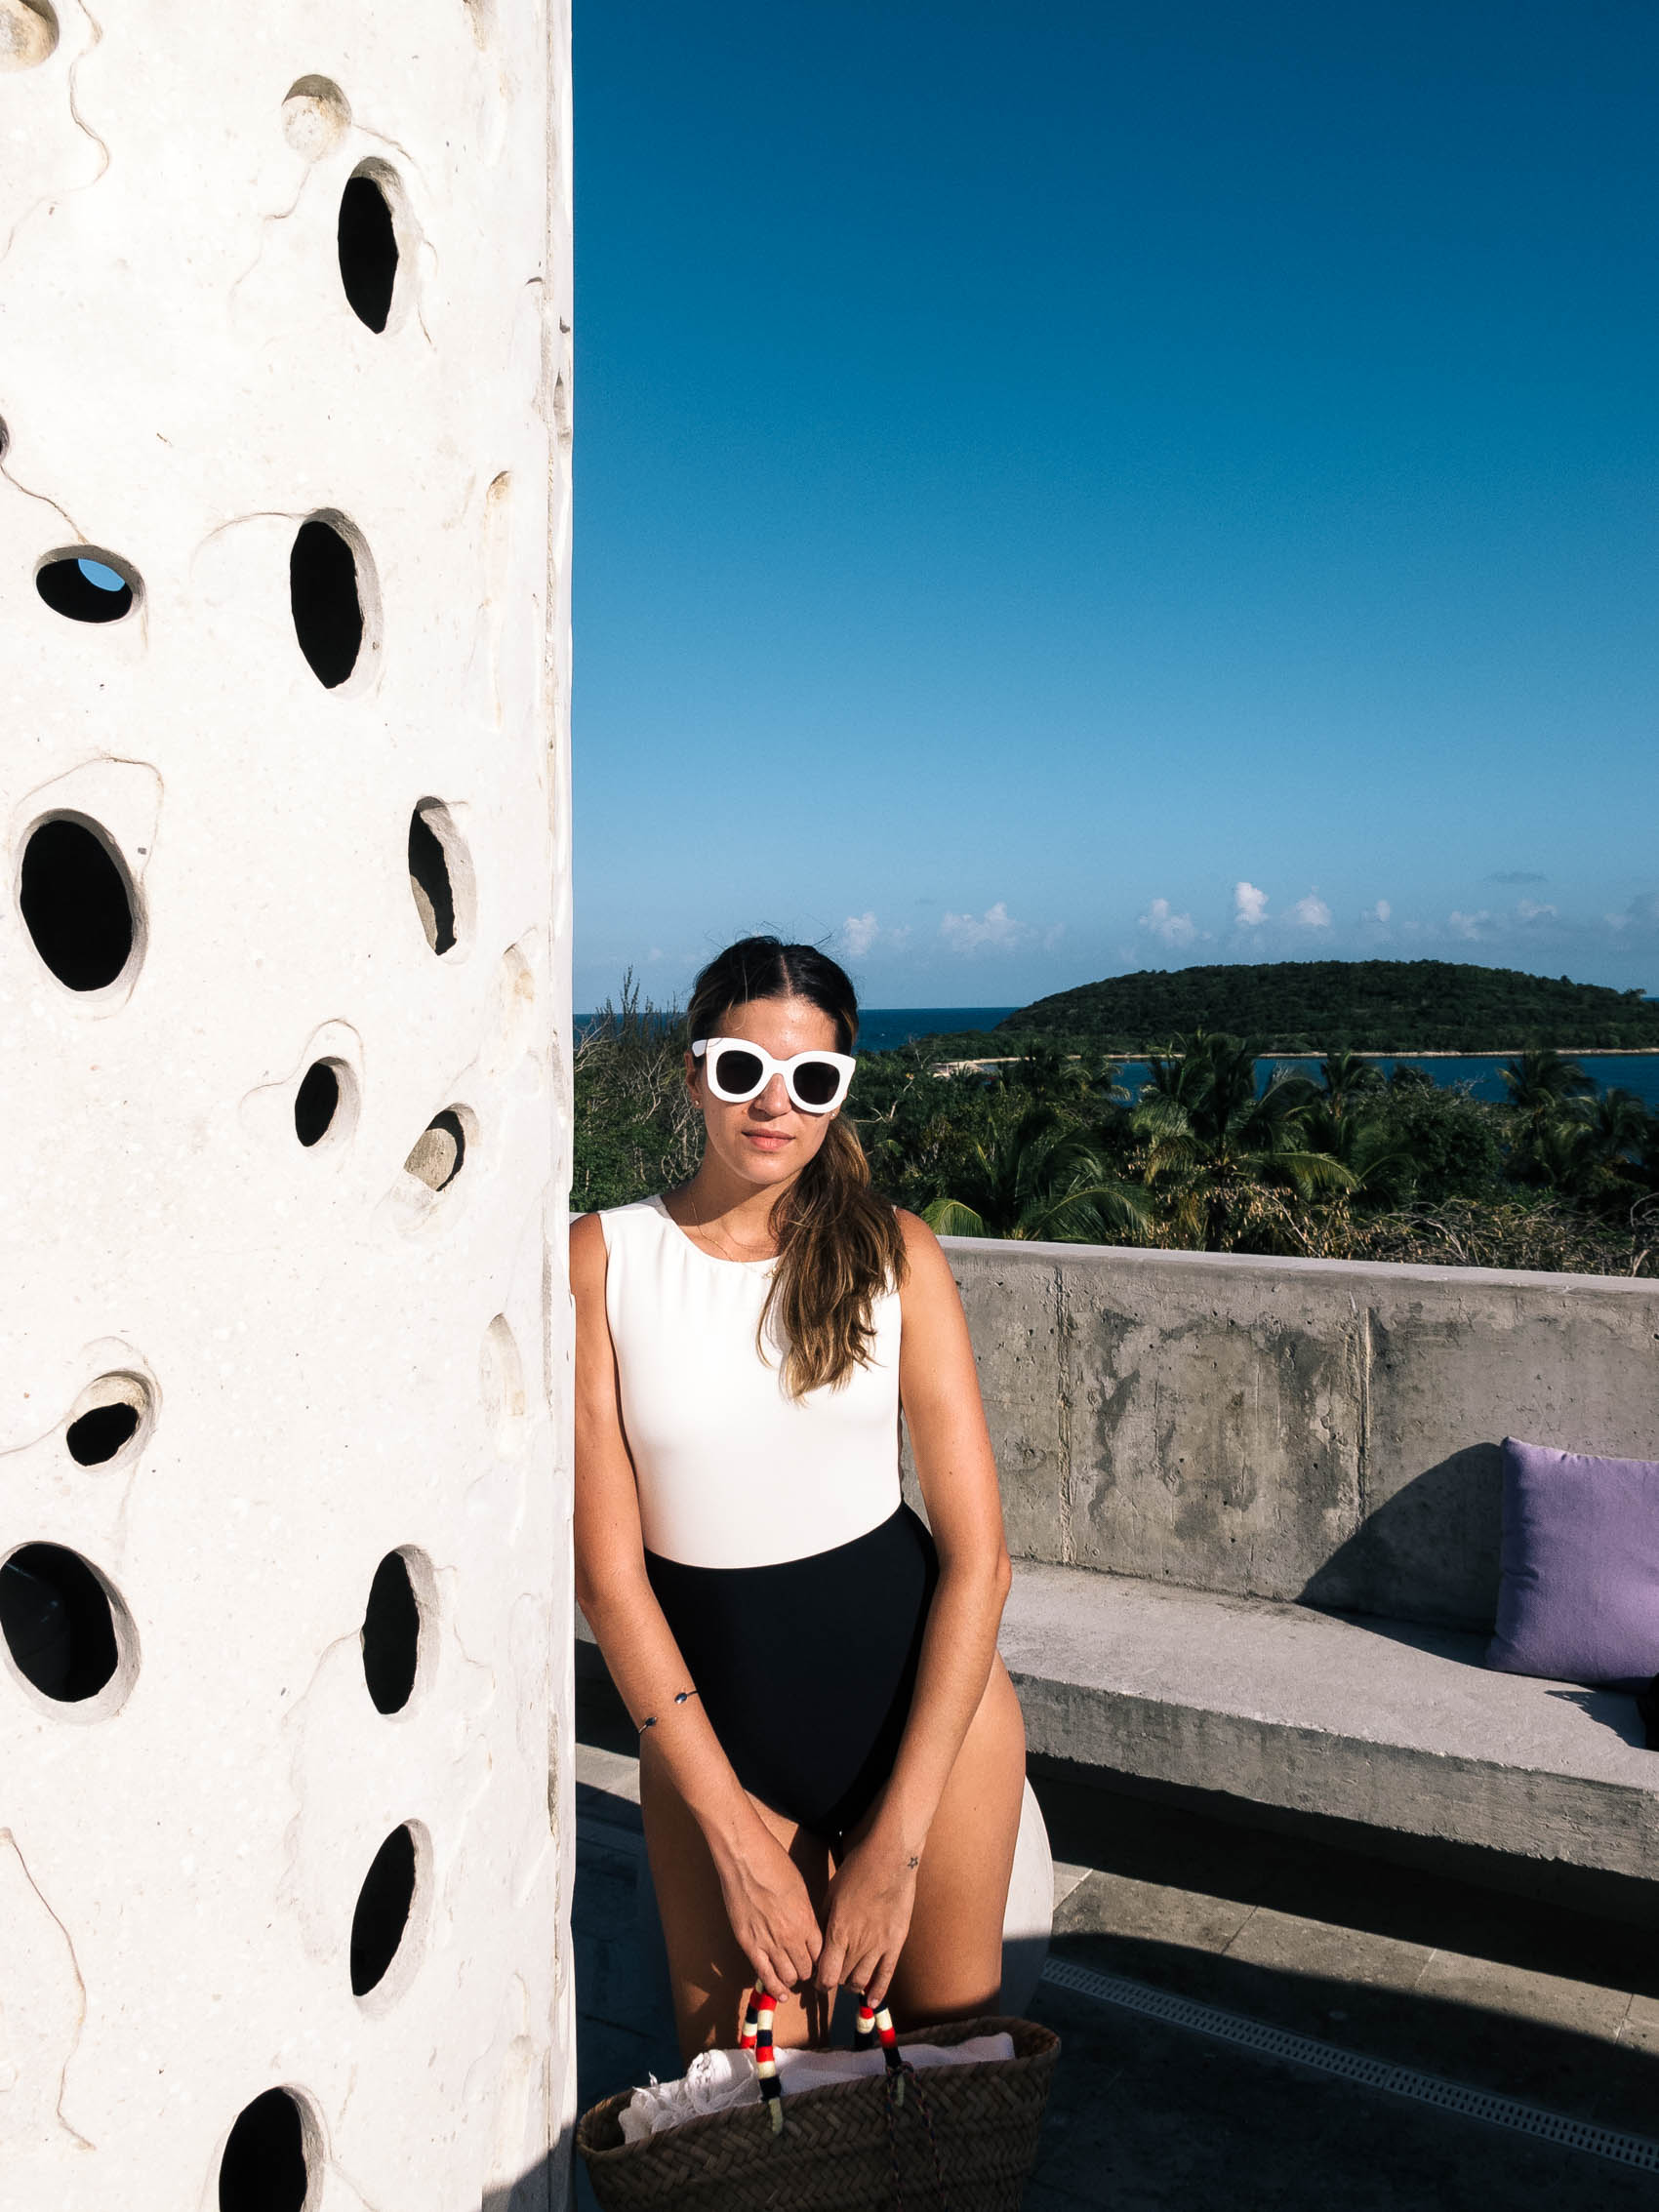 Maristella wears a one piece bathing suit by Lenny Niemeyer at El Blok hotel in Vieques Island Puerto Rico